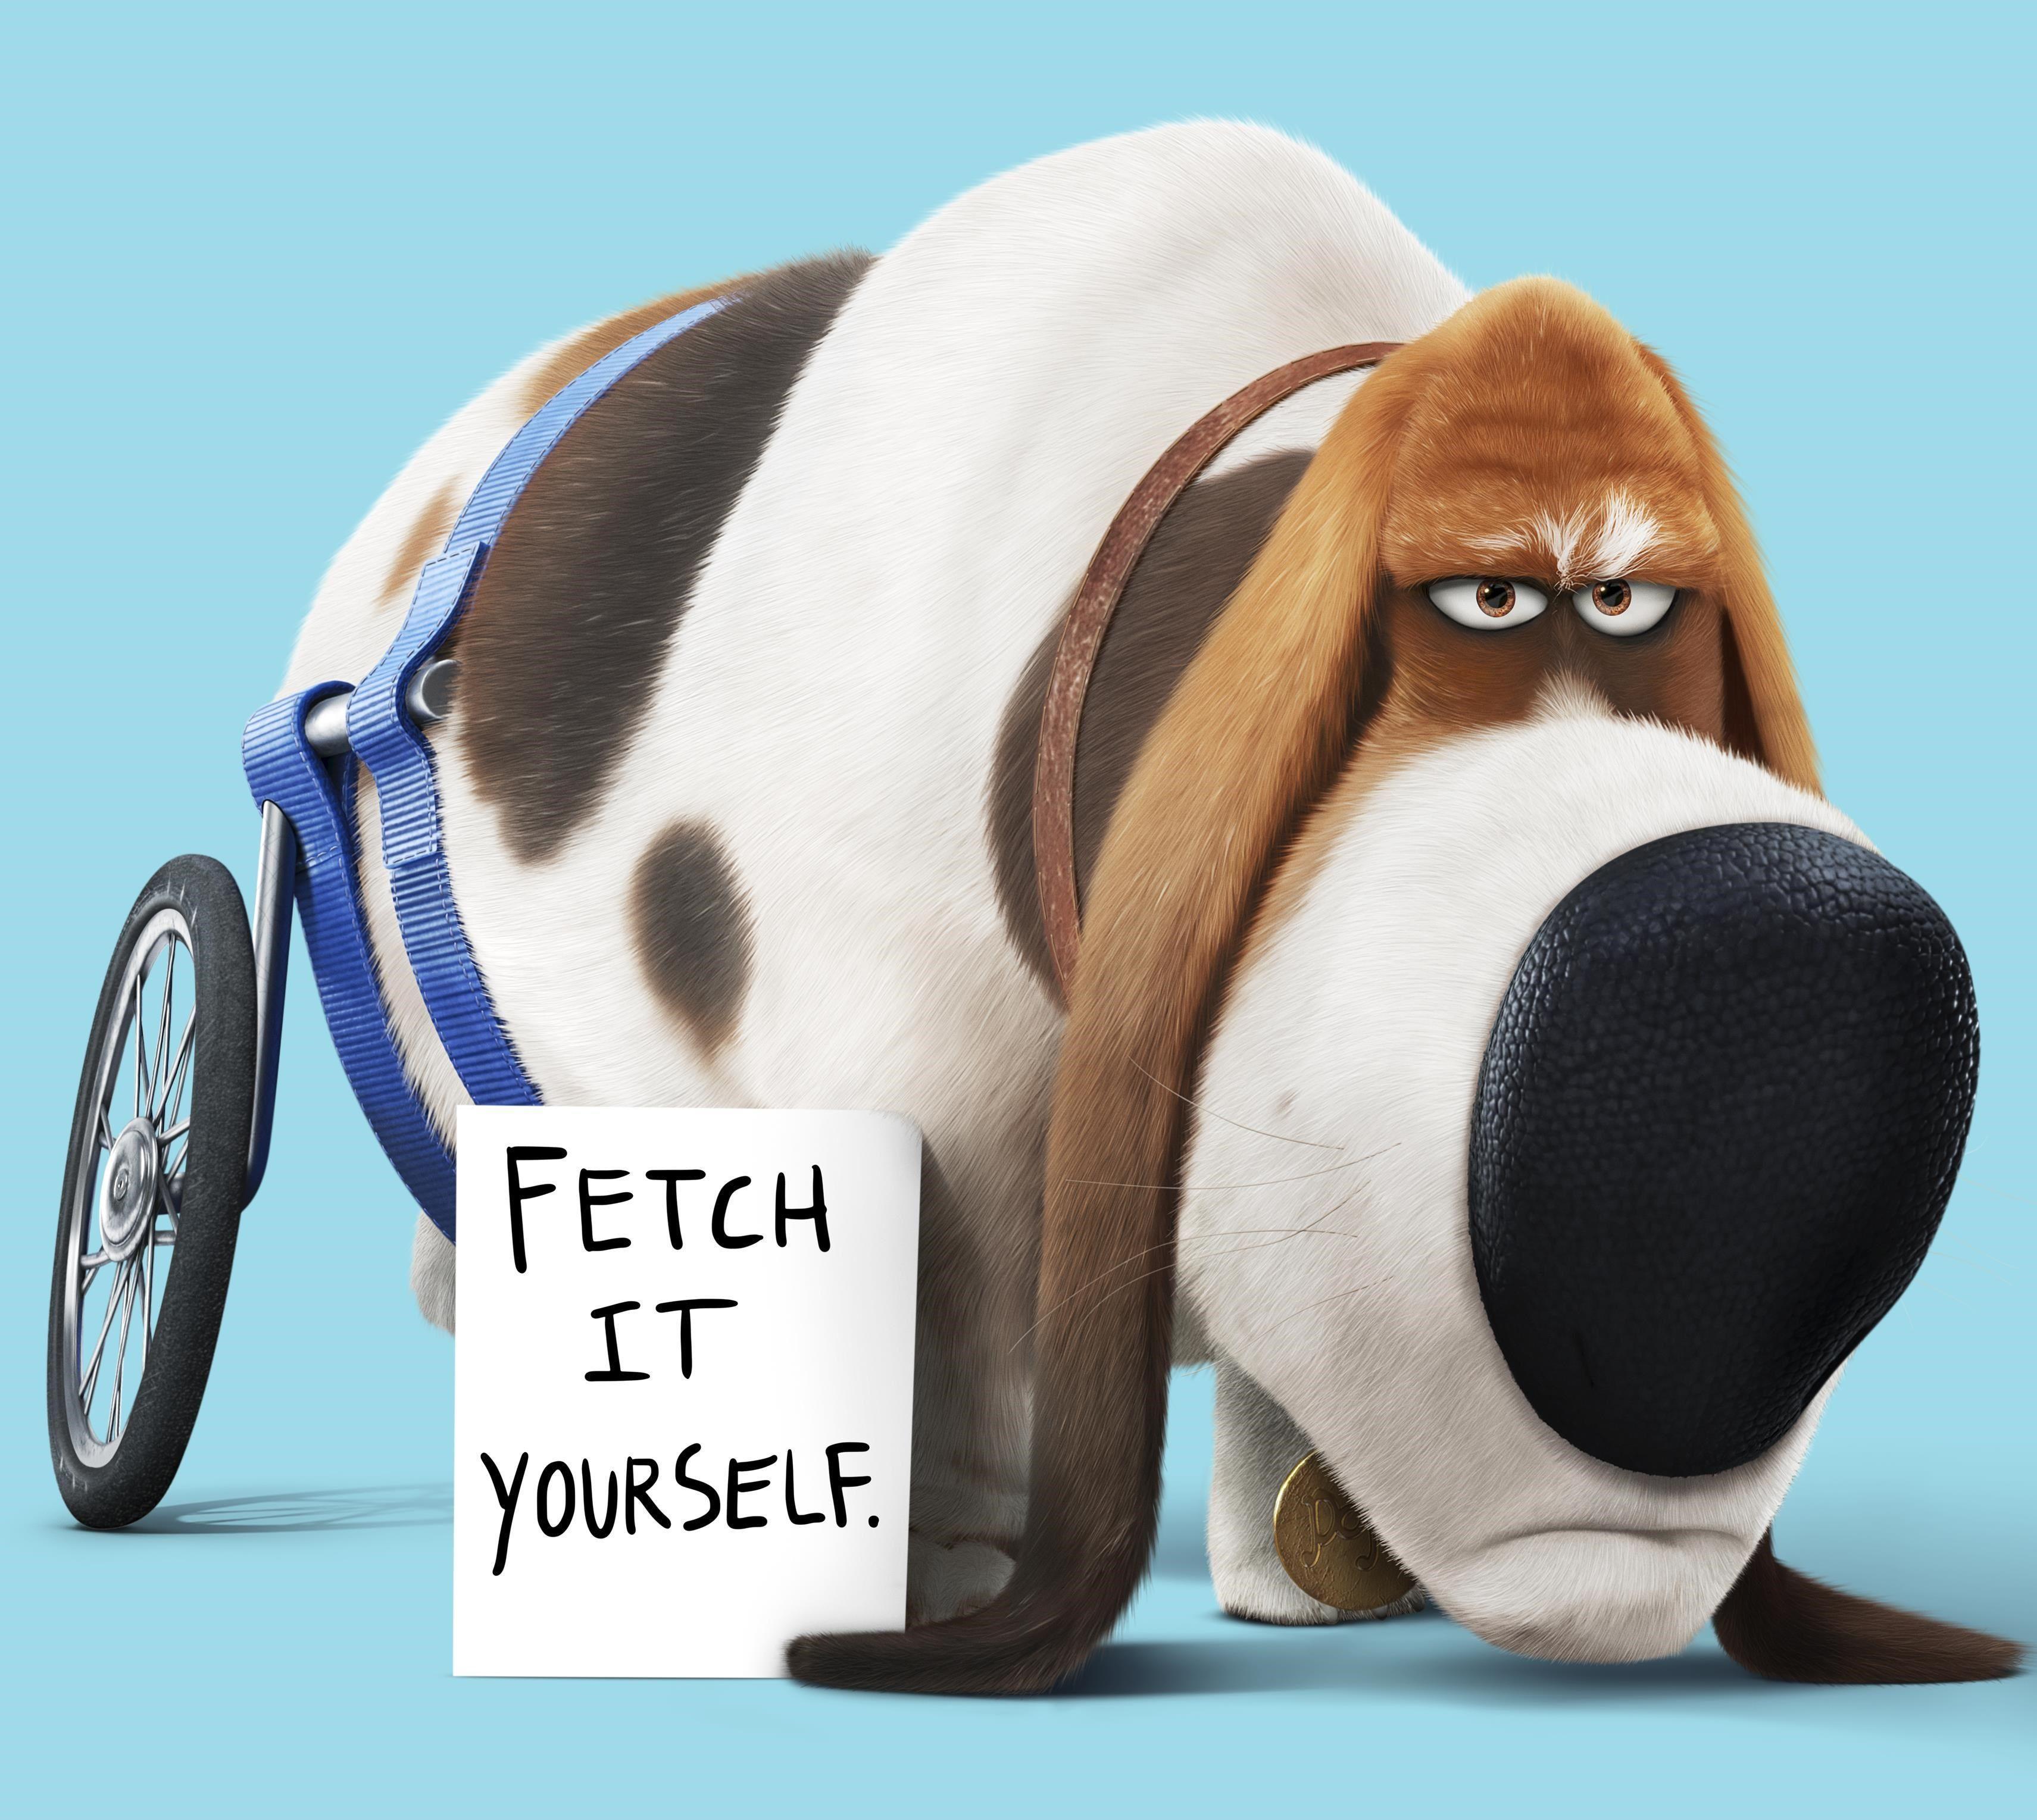 the secret life of pets movie free online